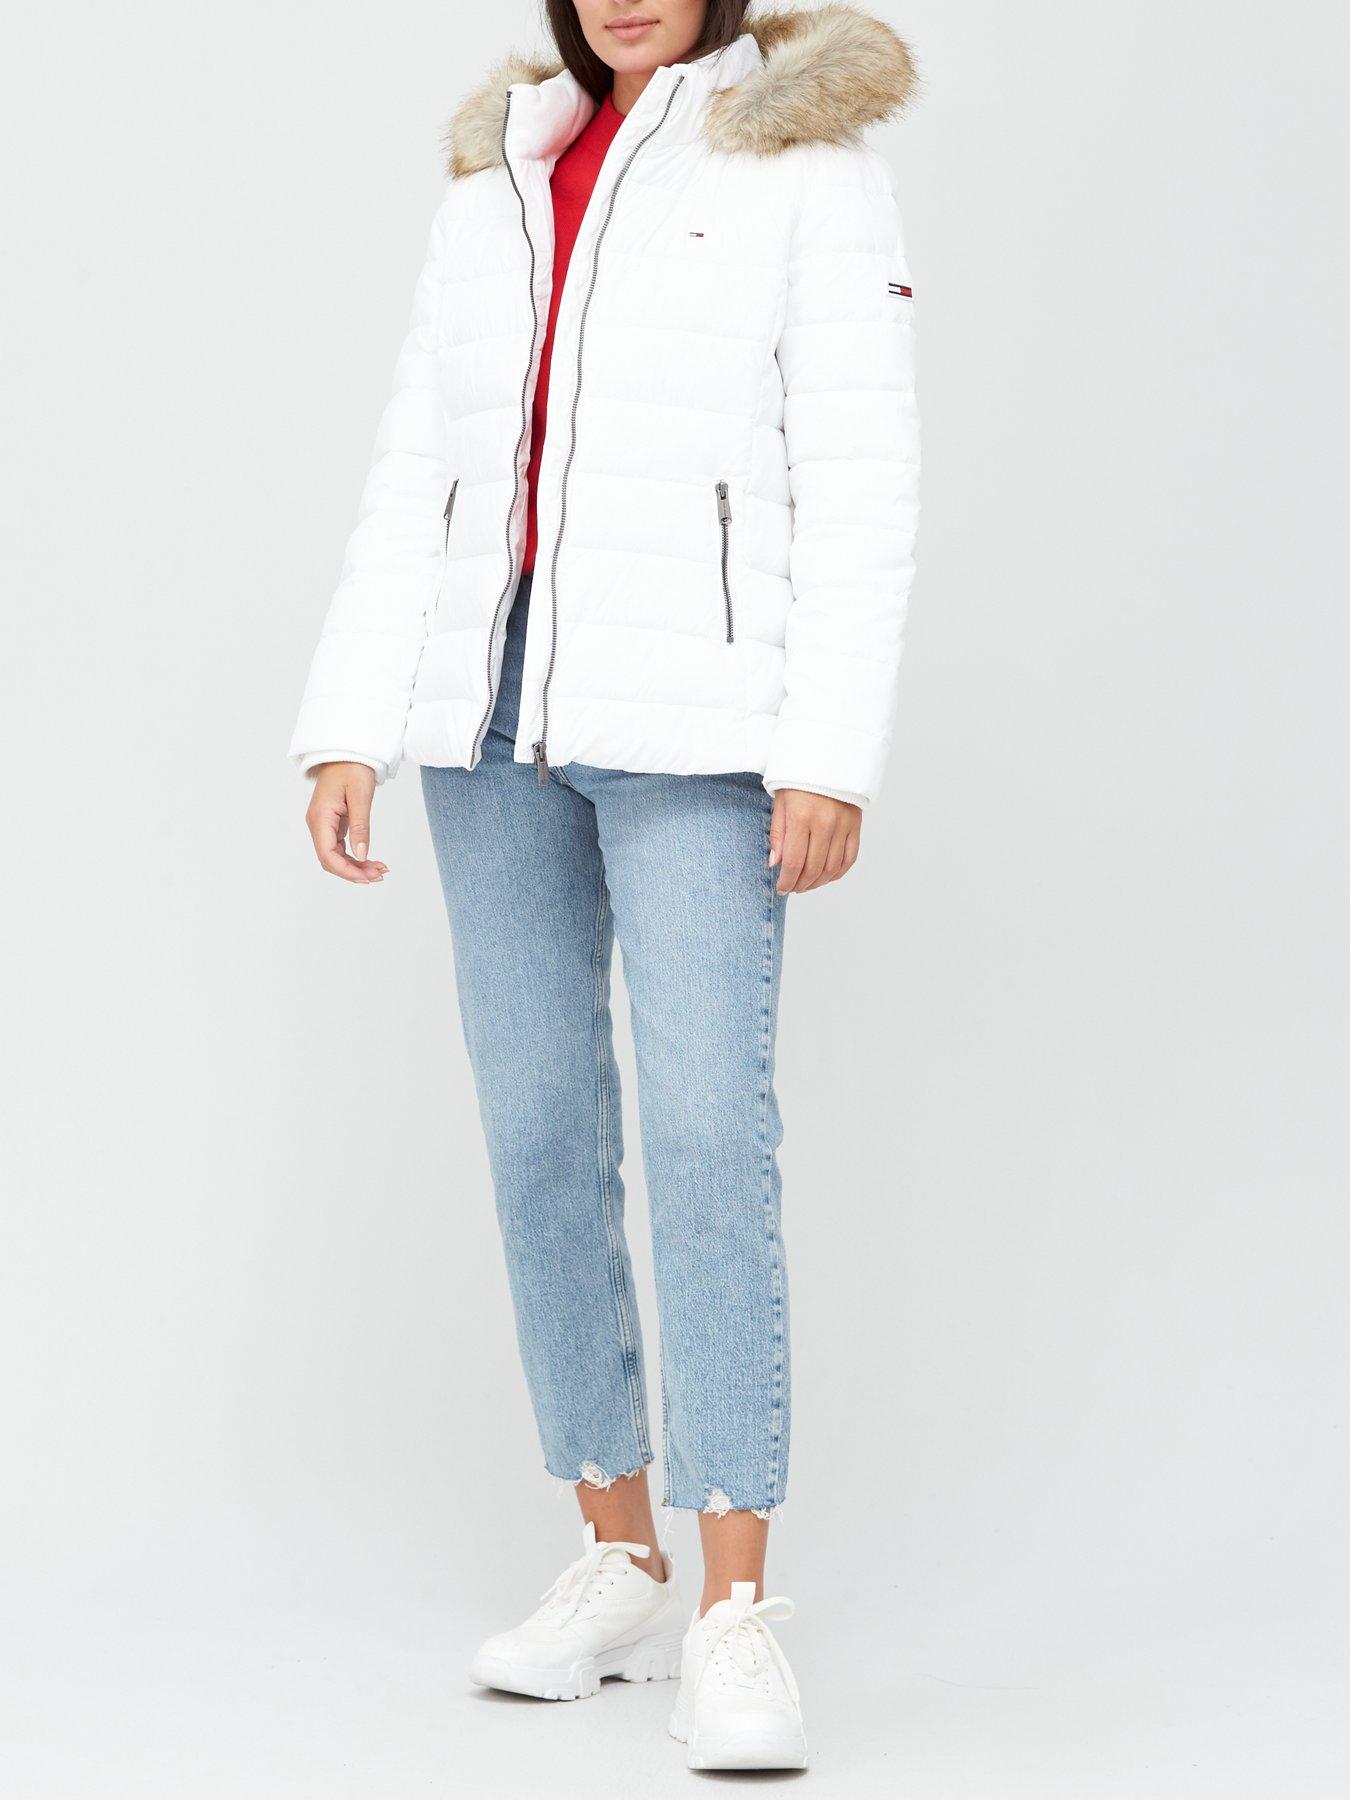 womens tommy hilfiger quilted jacket